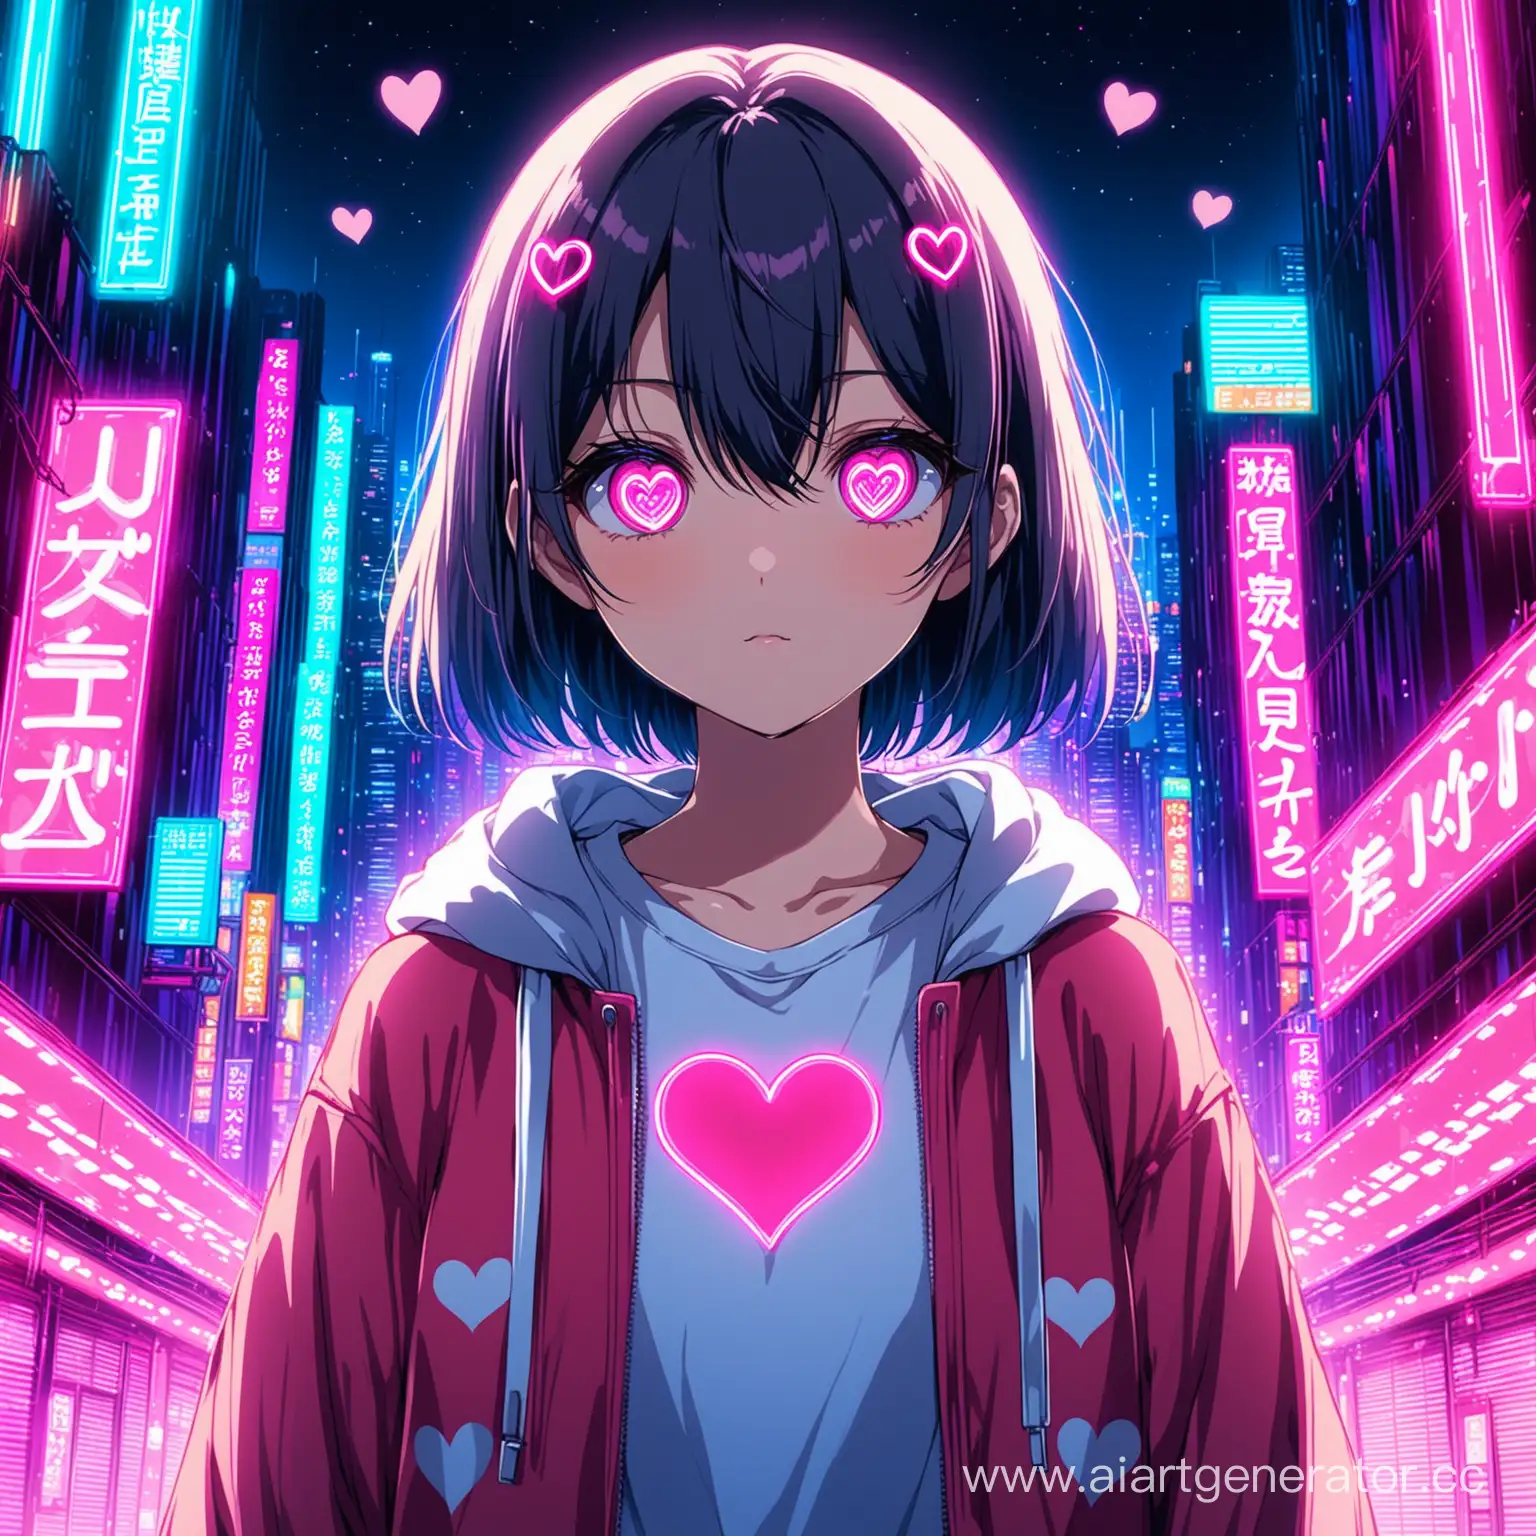 Anime girl with hearts in her eyes, standing in front of a neon city